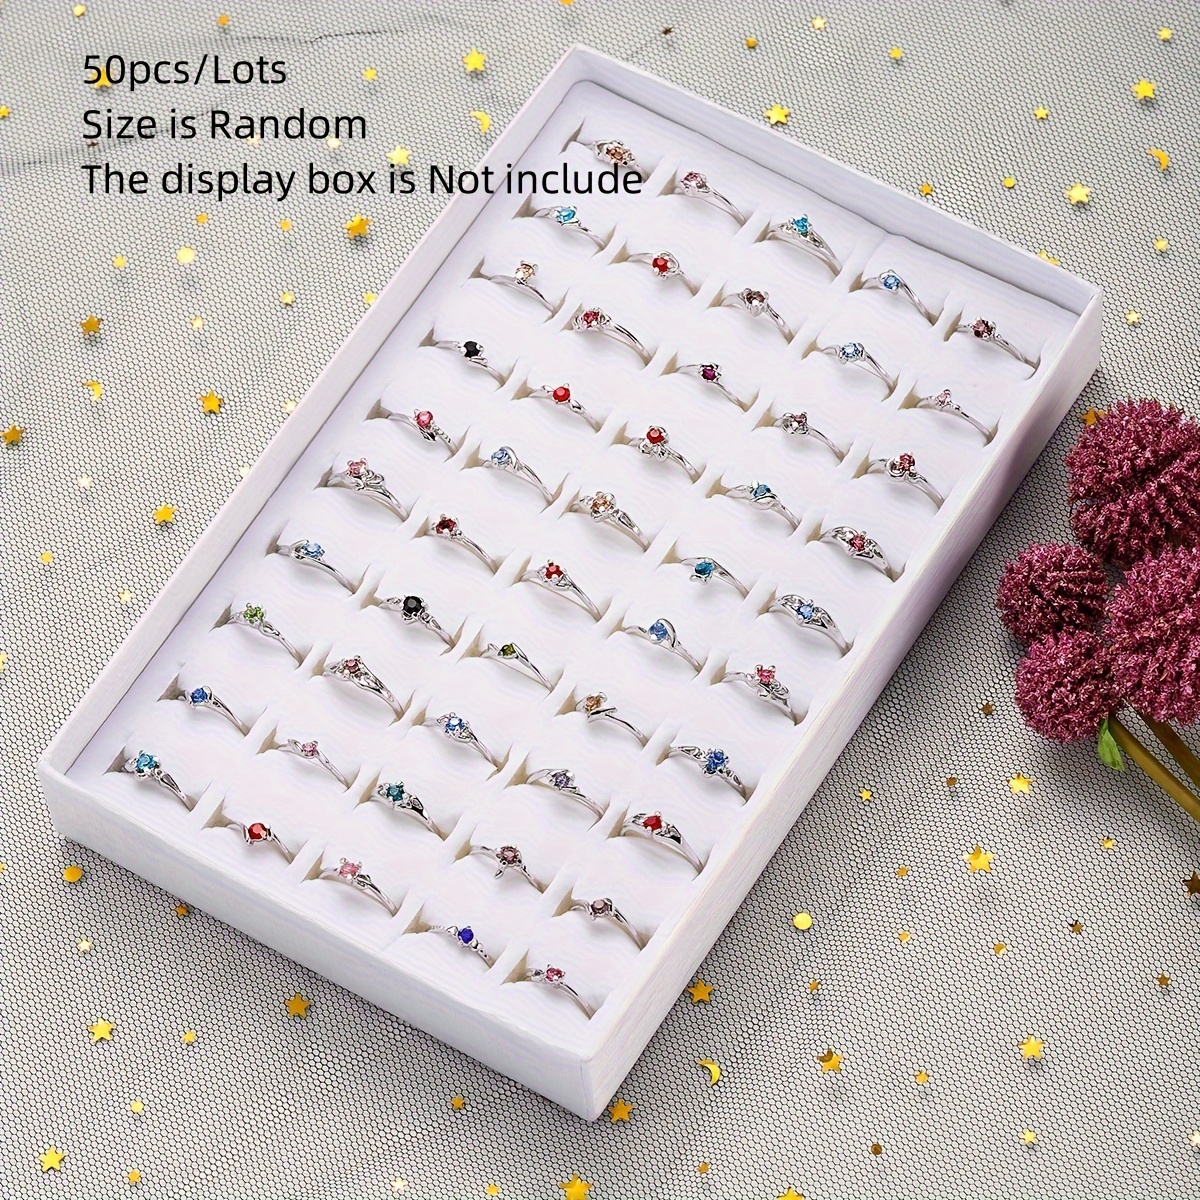 

Wholesale 50pcs Multi Color Rhinestone Rings Silver Color Girls Ring Sweet Women Lover Gift Jewellry Box Is Not Include Size 16-19mm Random